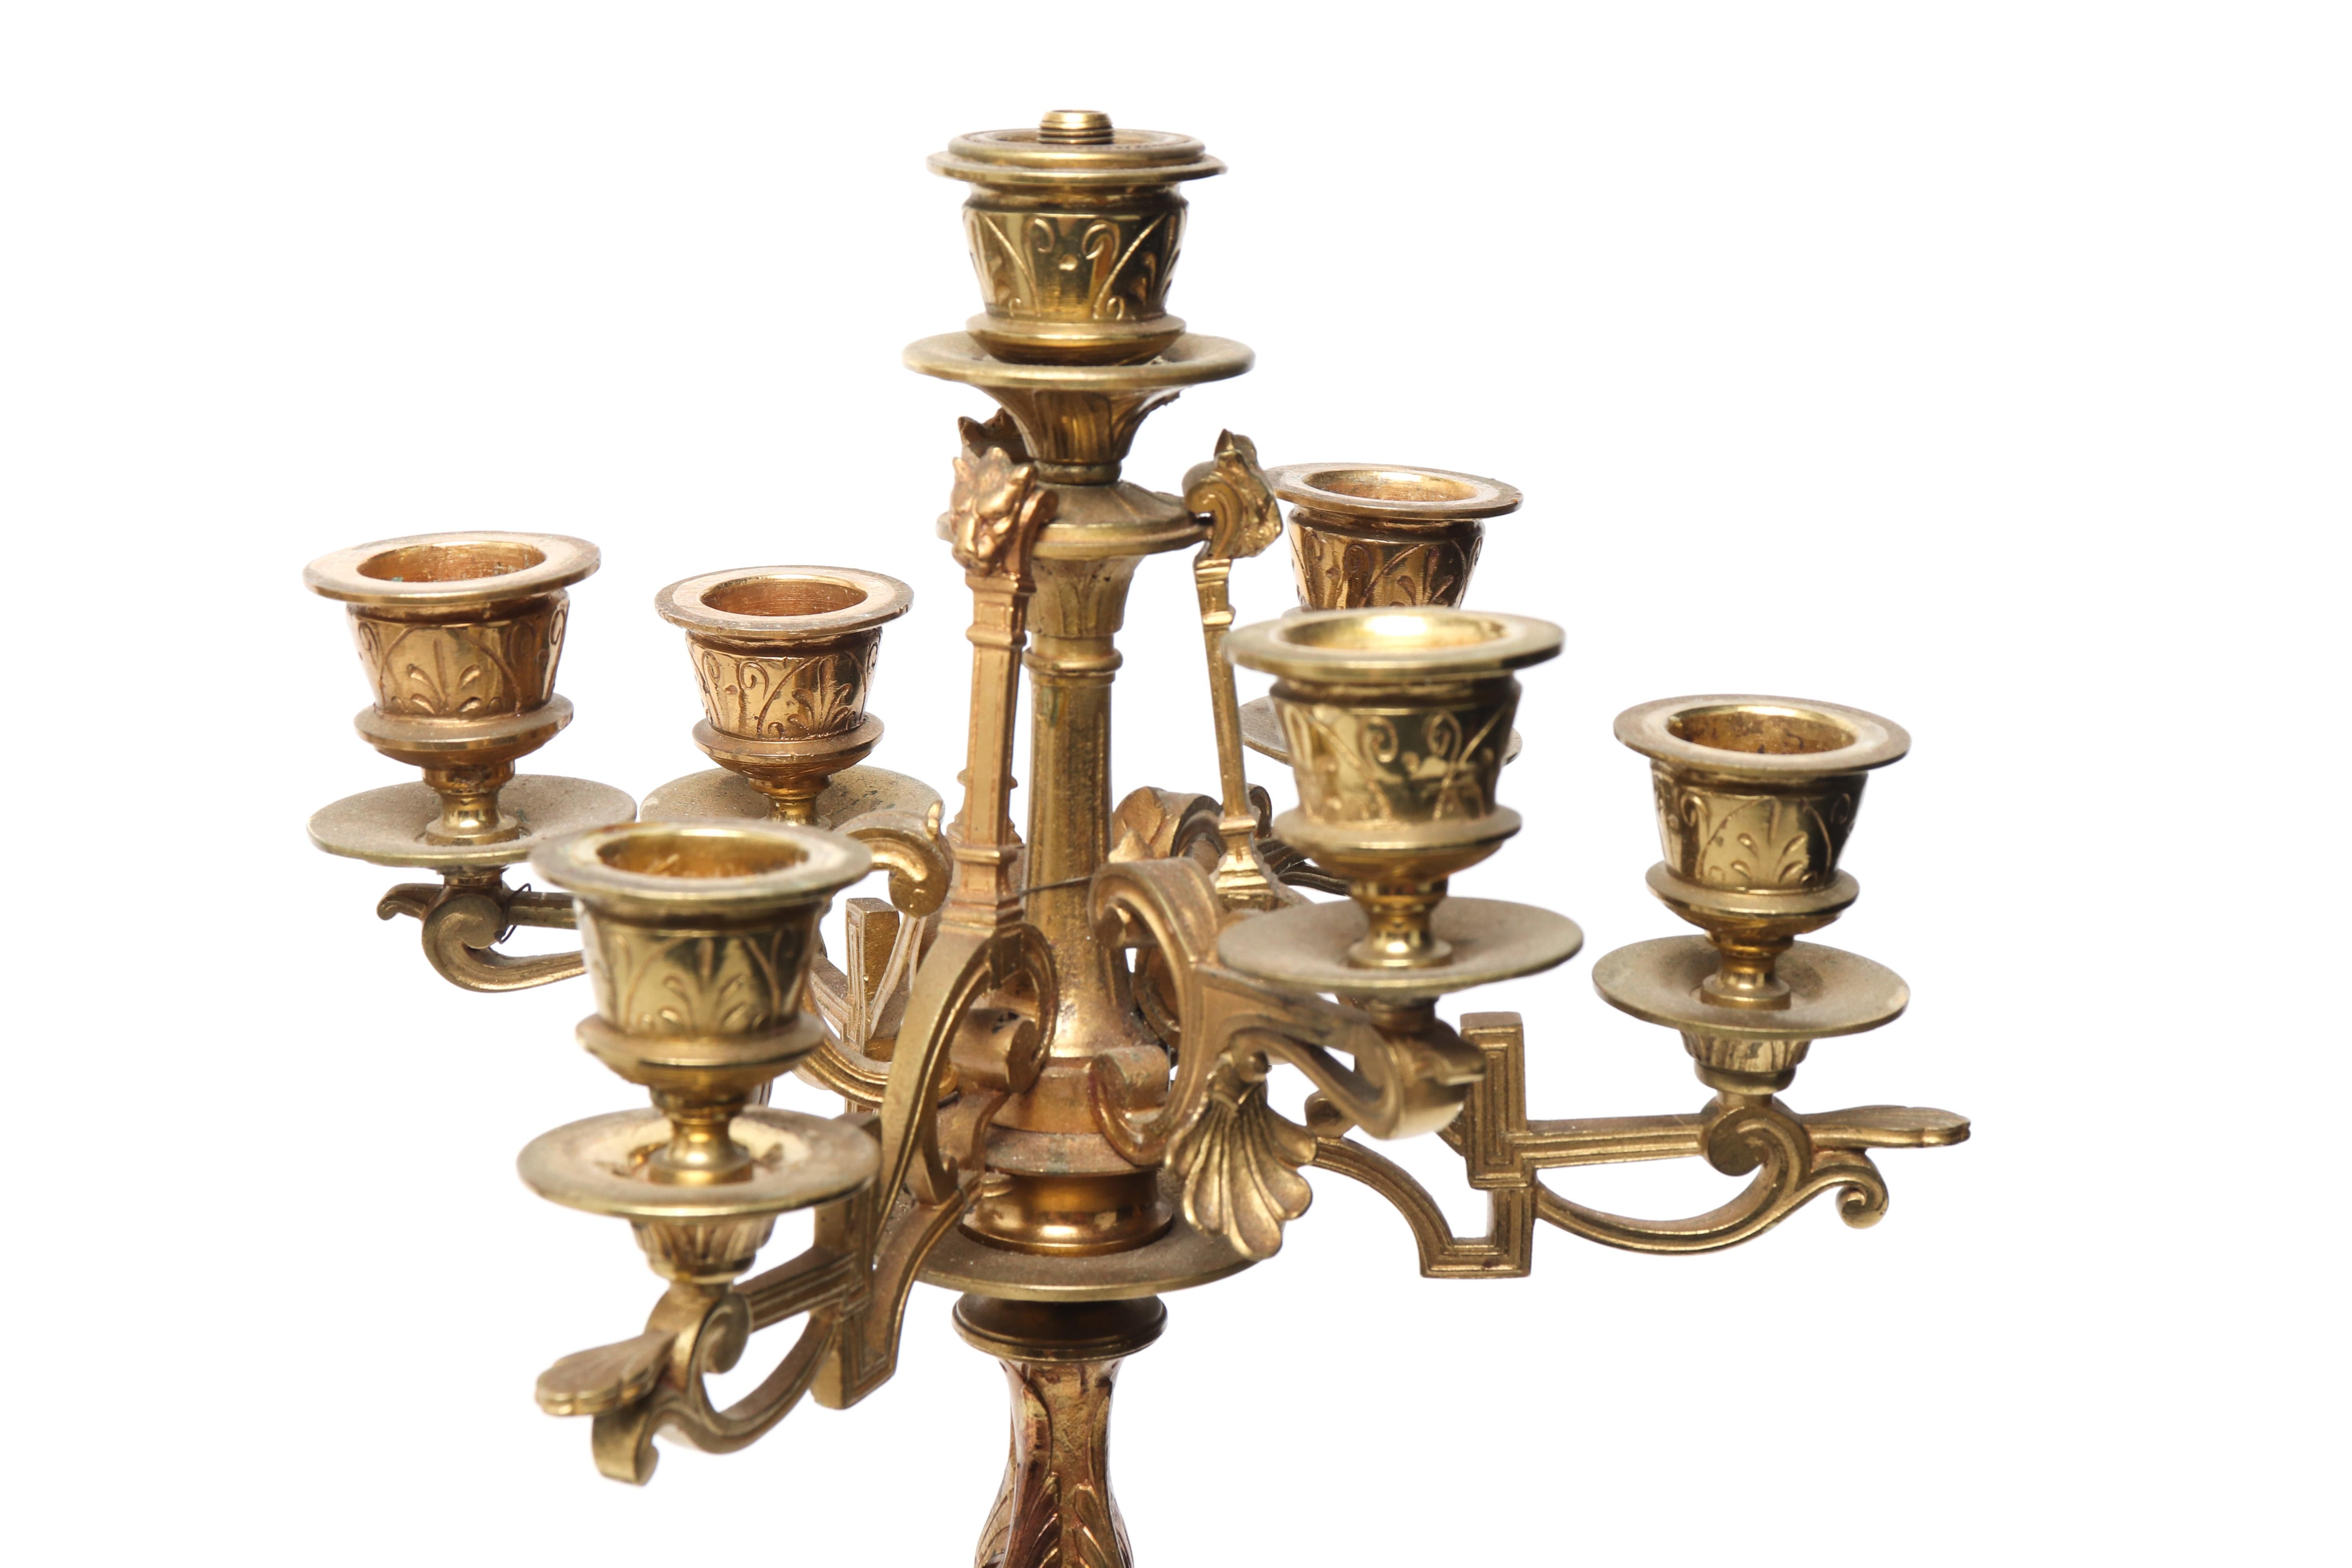 20th Century French Neoclassical Style Figural Ormolu Candelabras after Mathurin Moreau